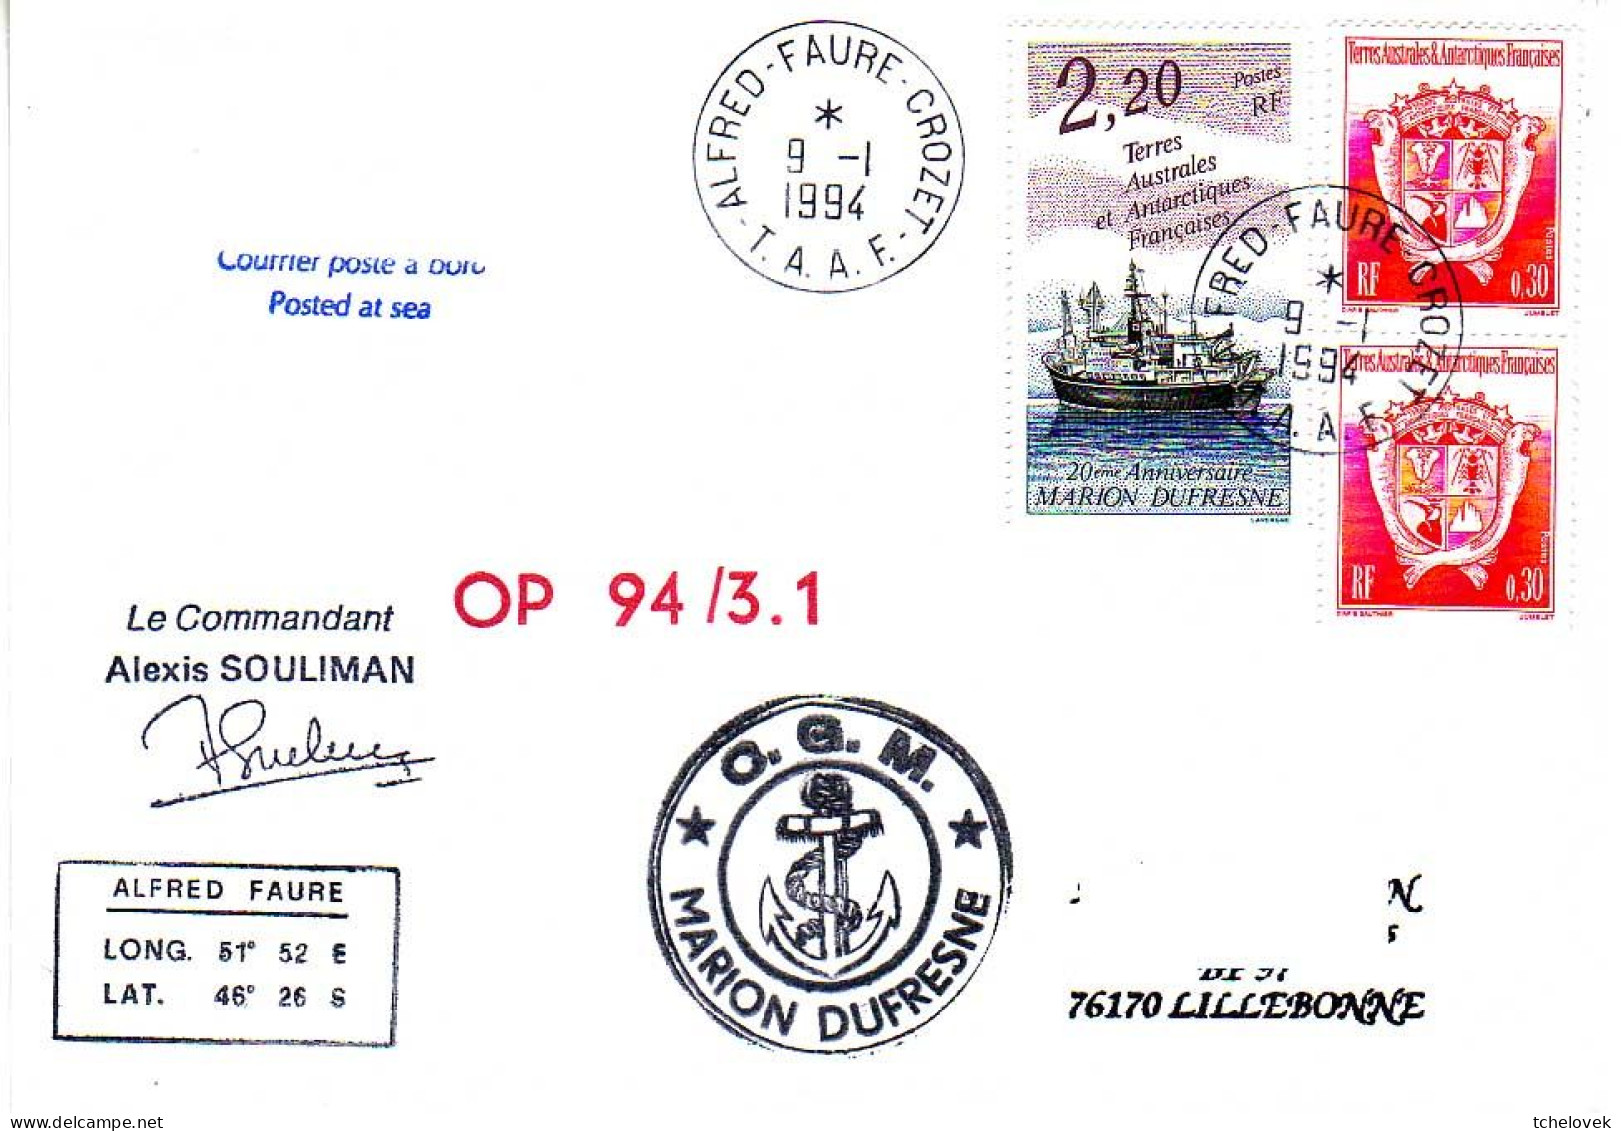 (Timbres). FSAT TAAF Marion Dufresne. 09.01.94 Crozet OP 94/3.1 - Covers & Documents